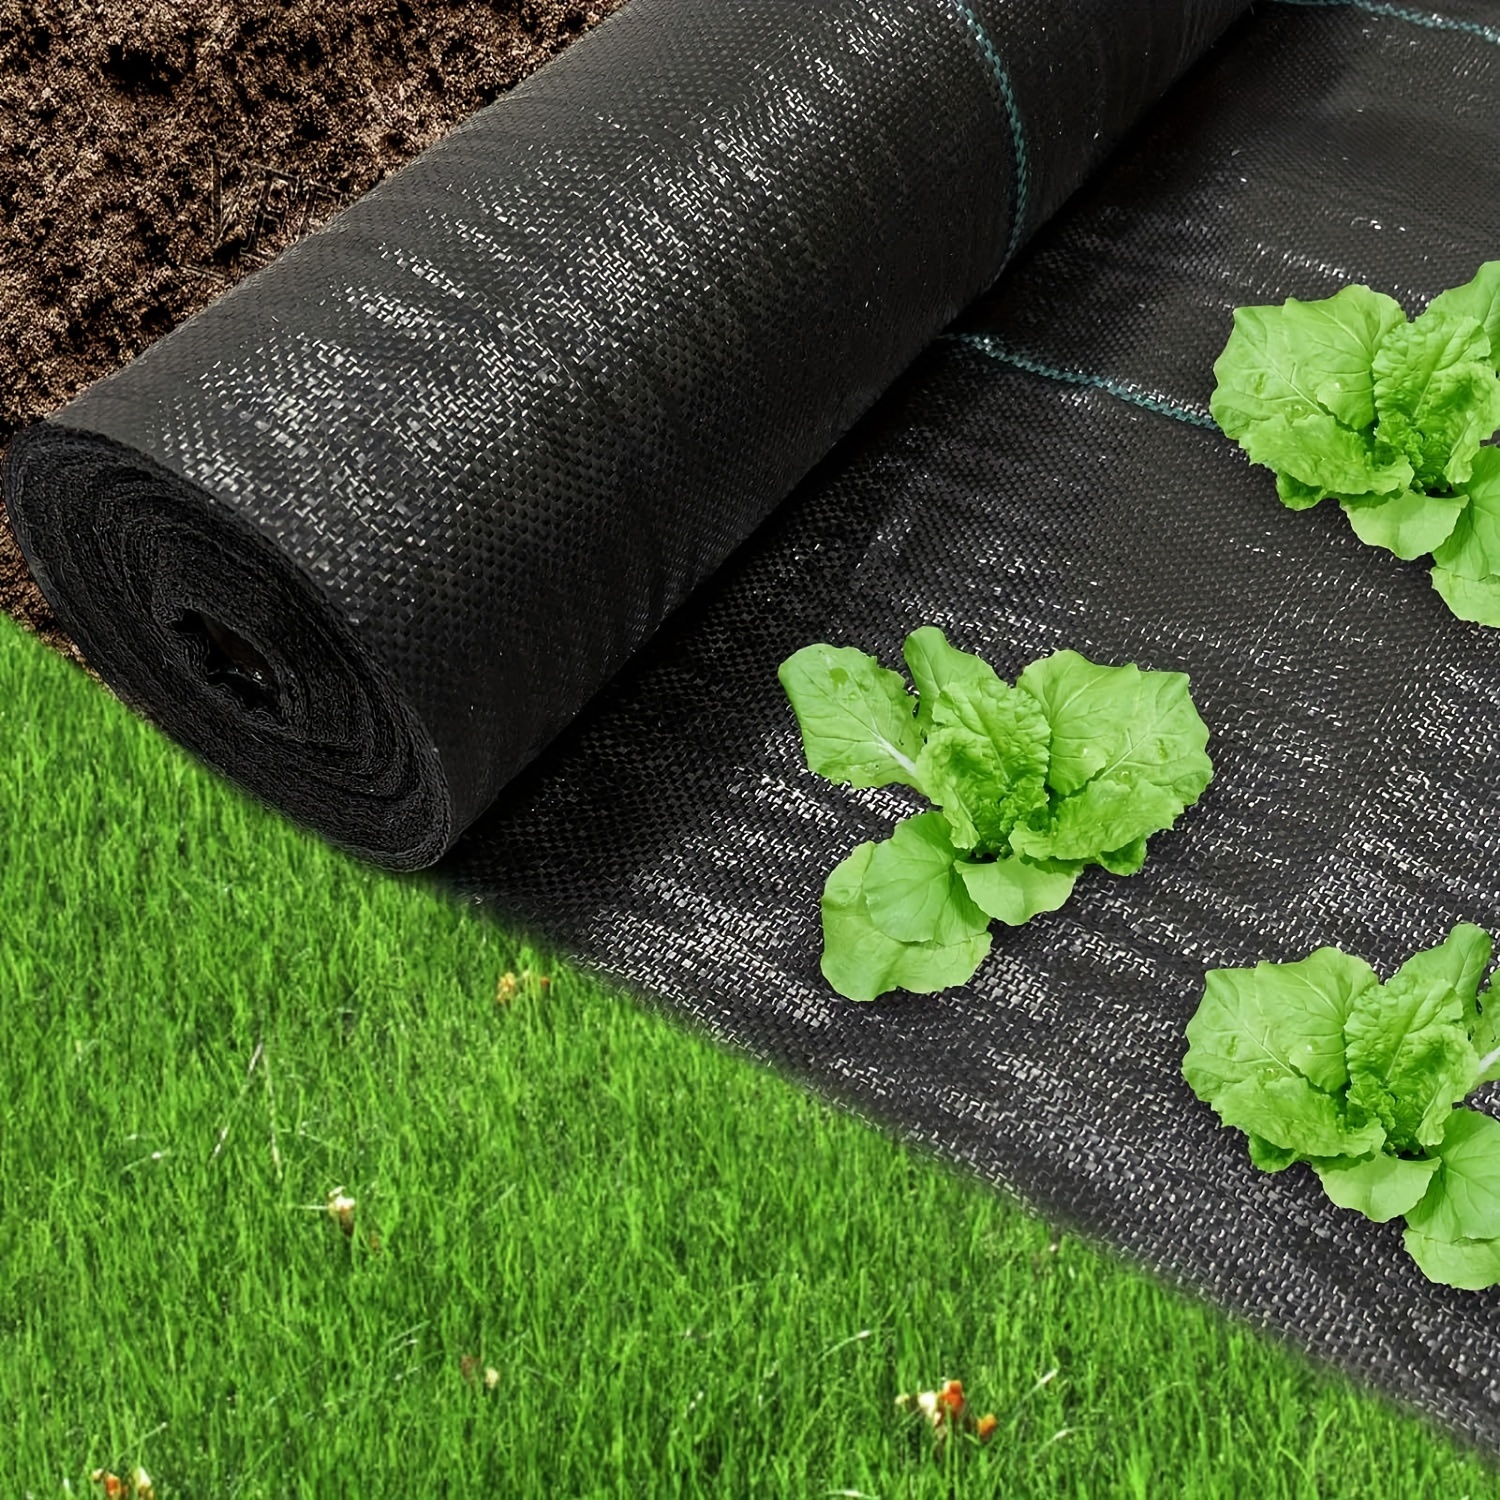 

1 Pack, Garden Barrier Landscape Fabric, Block Fabric, Woven Mulch For Landscaping Ground Cover Control Fabric, Black Garden Bed Liner For Outdoor Garden Supplies